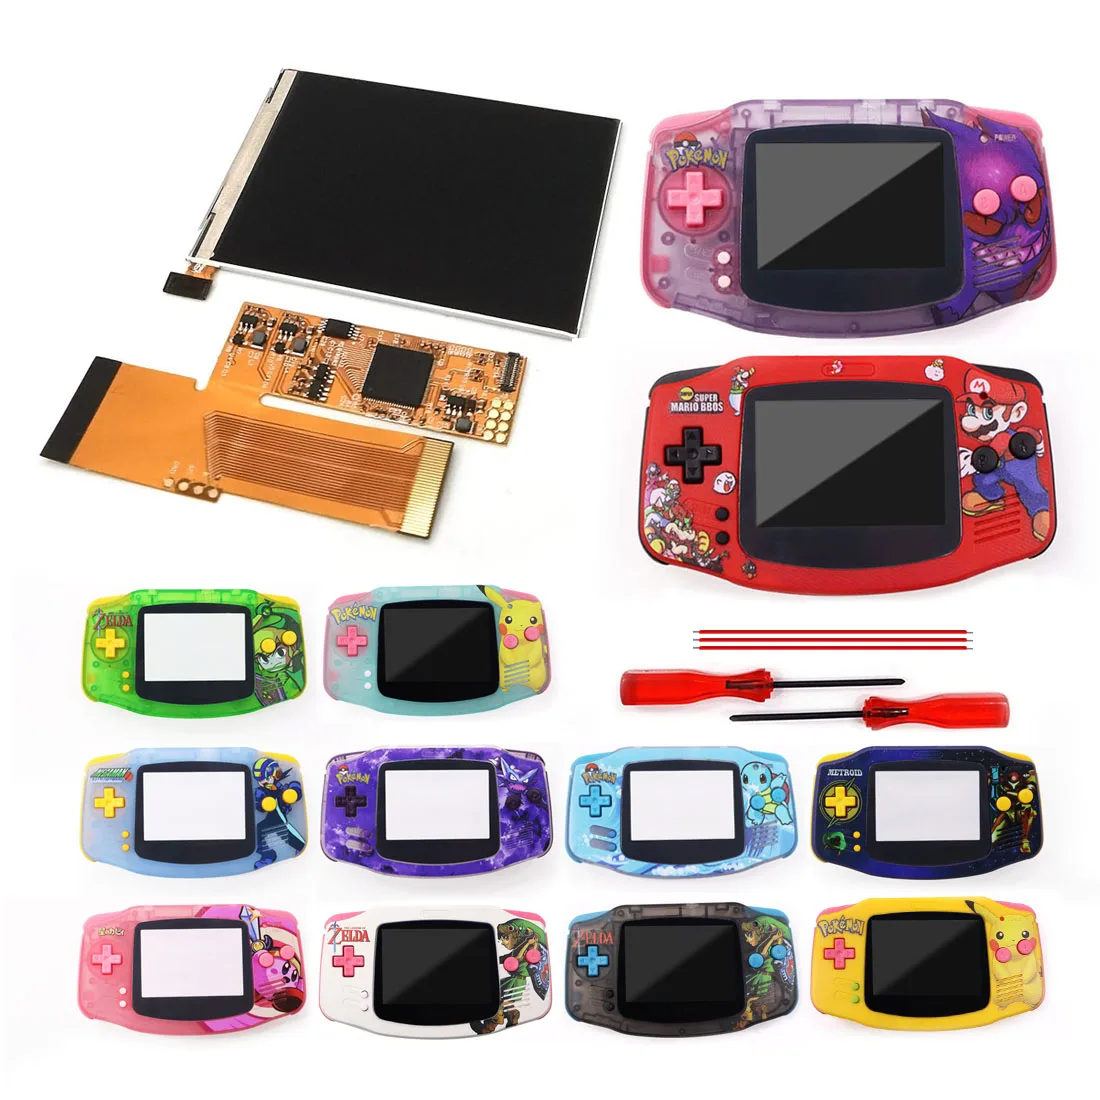 

Custom UV Printed Shell Housing For GBA IPS V2 Screen Kits 10 Levels High Brightness Backlight LCD for Gameboy Advance Console